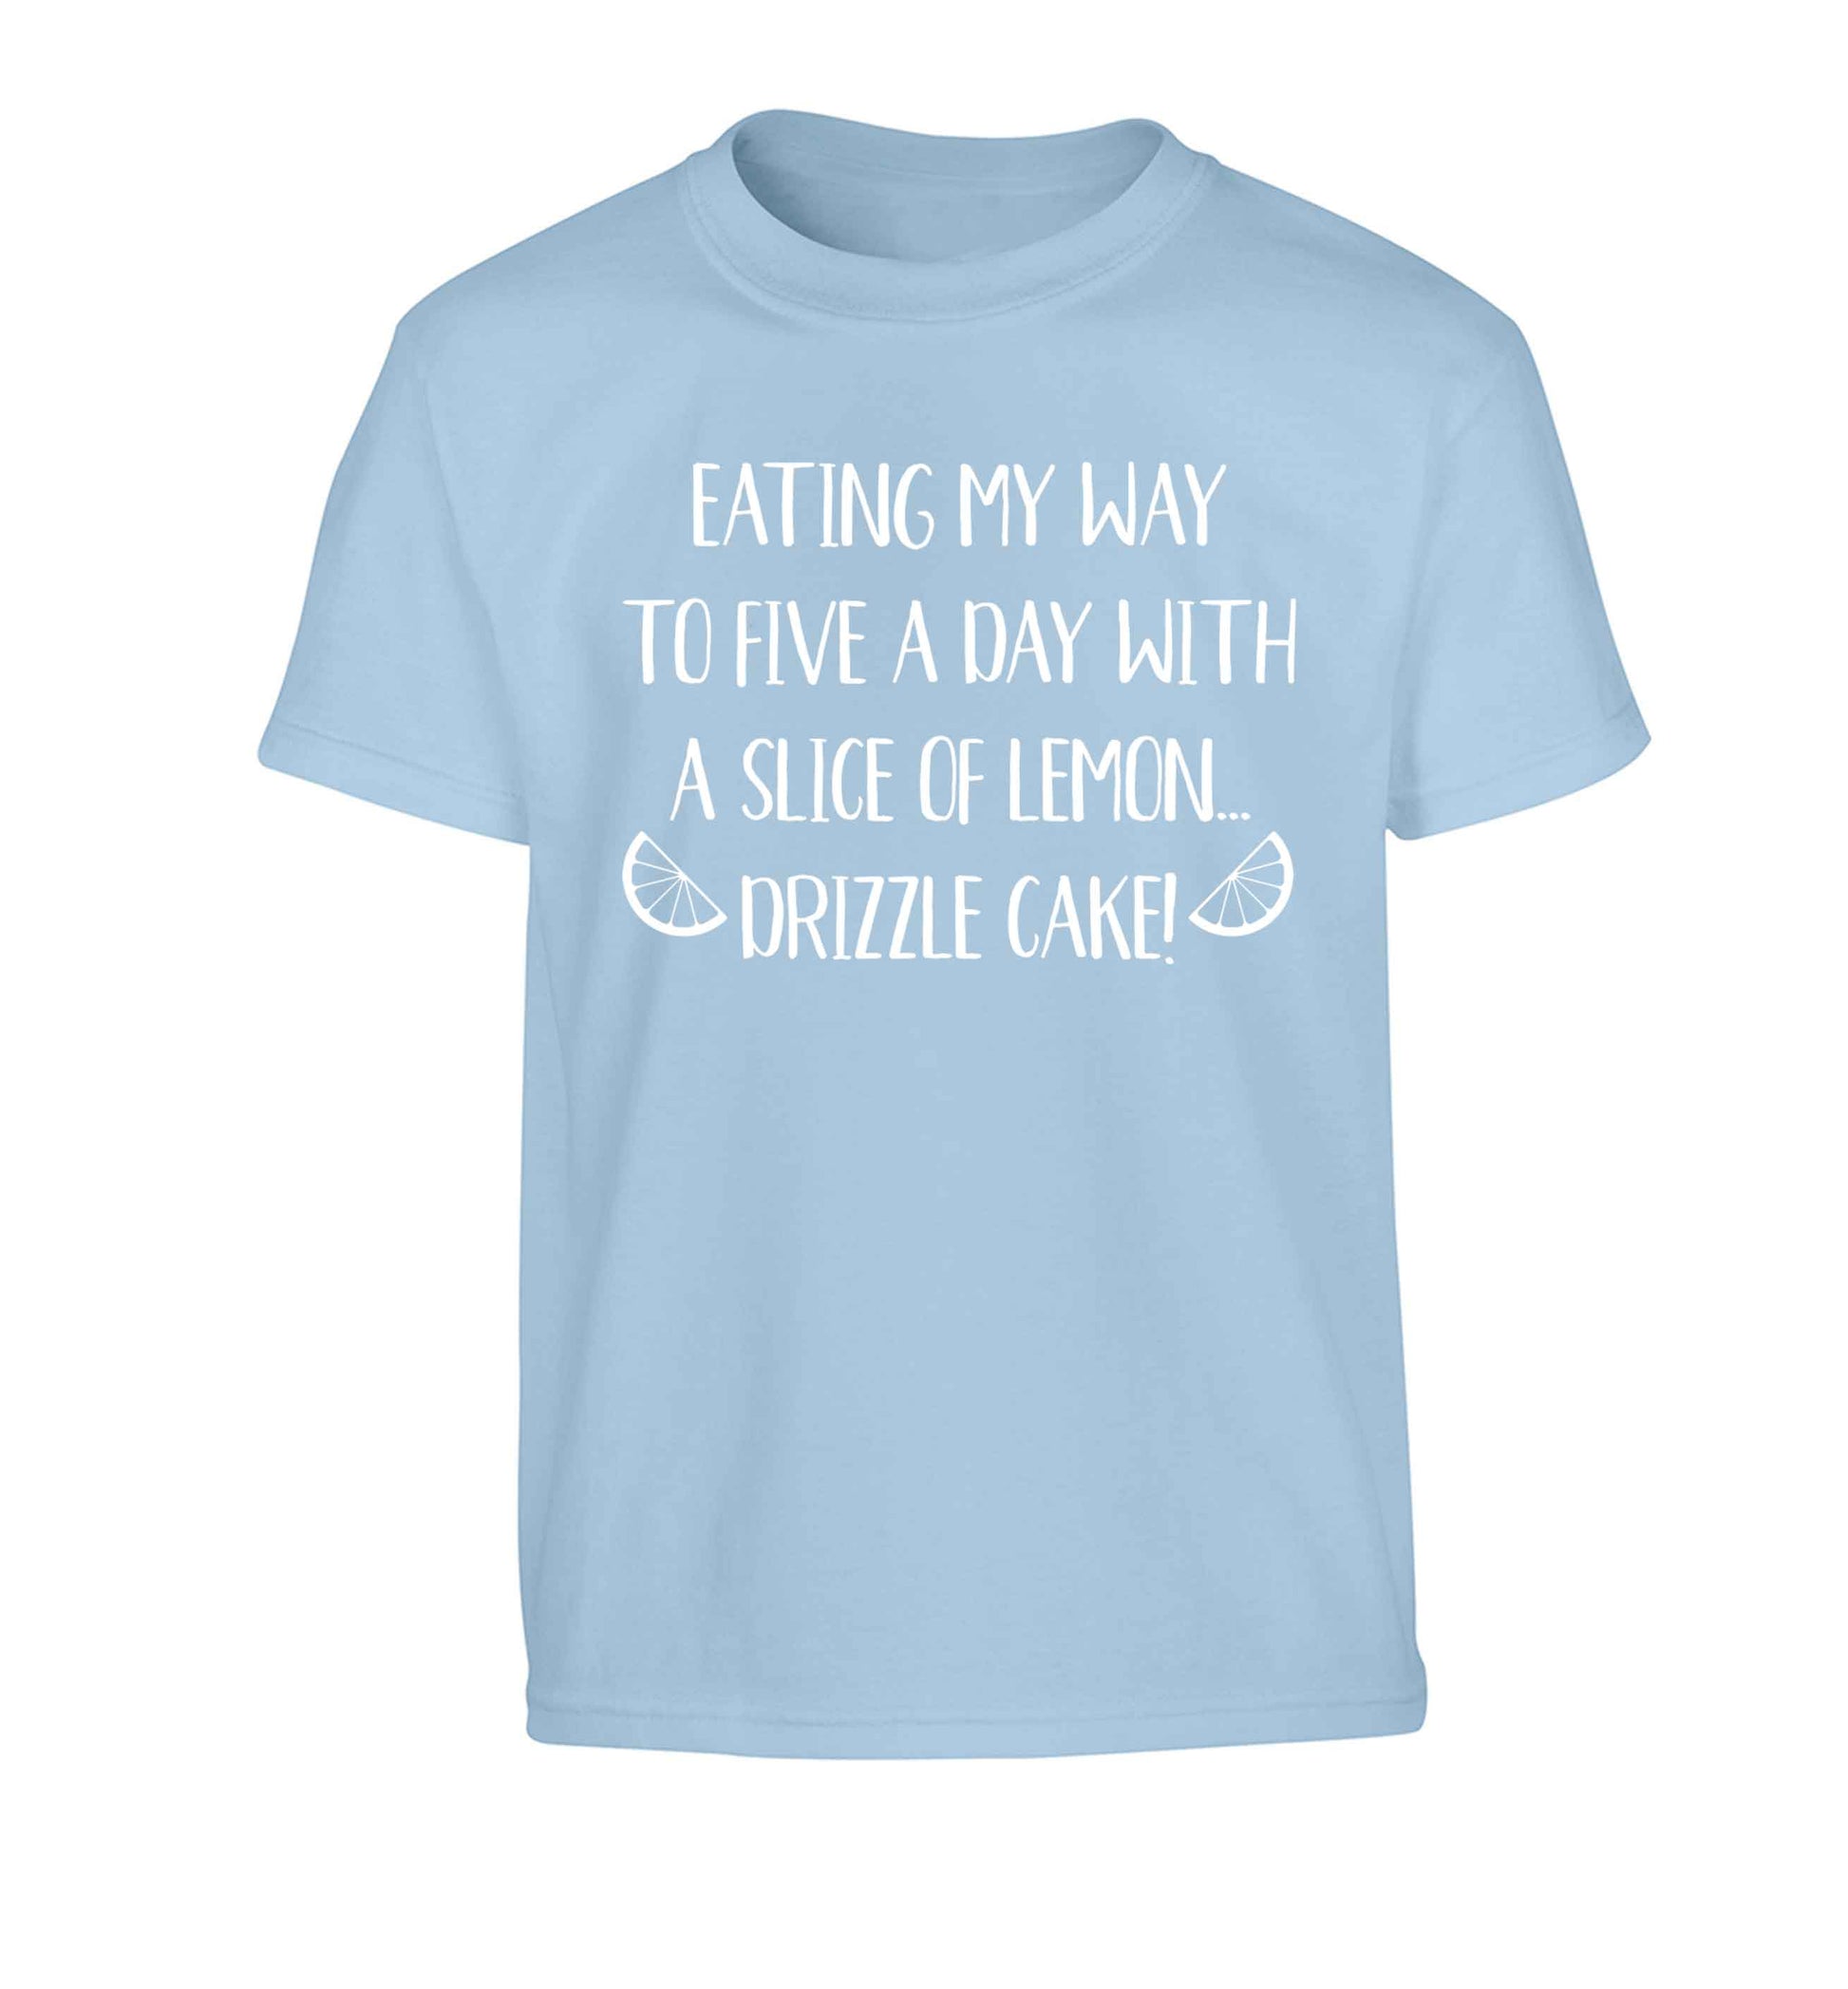 Eating my way to five a day with a slice of lemon drizzle cake day Children's light blue Tshirt 12-13 Years